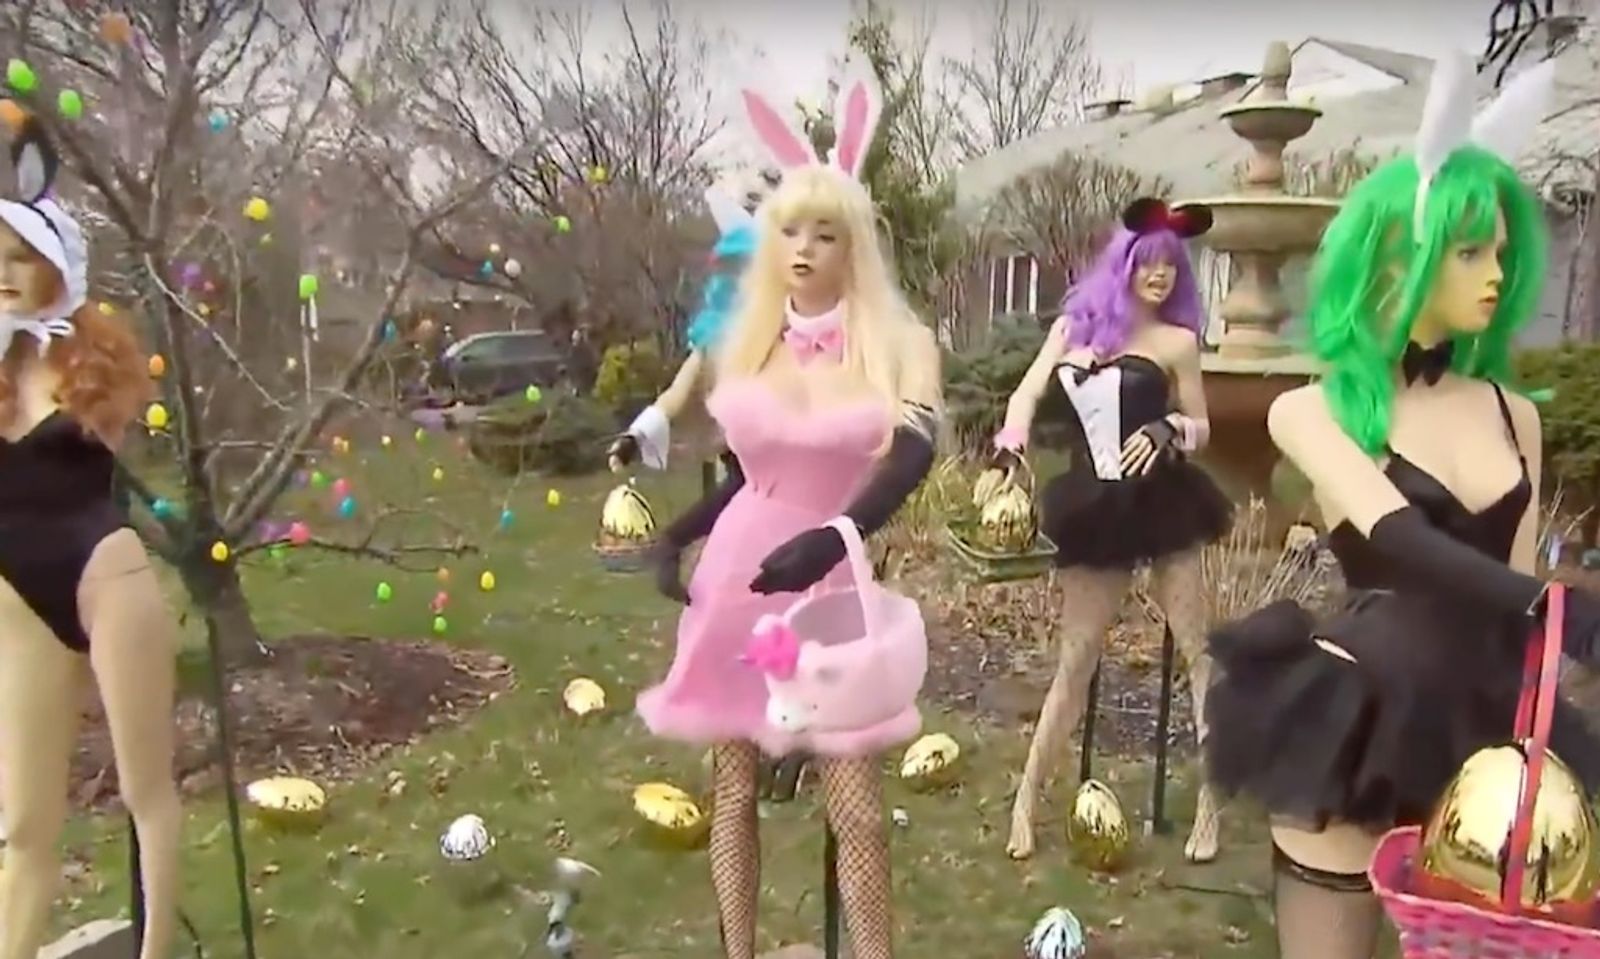 Dentist’s ‘Sexy’ Easter Lawn Display Raised $30 For Notre Dame